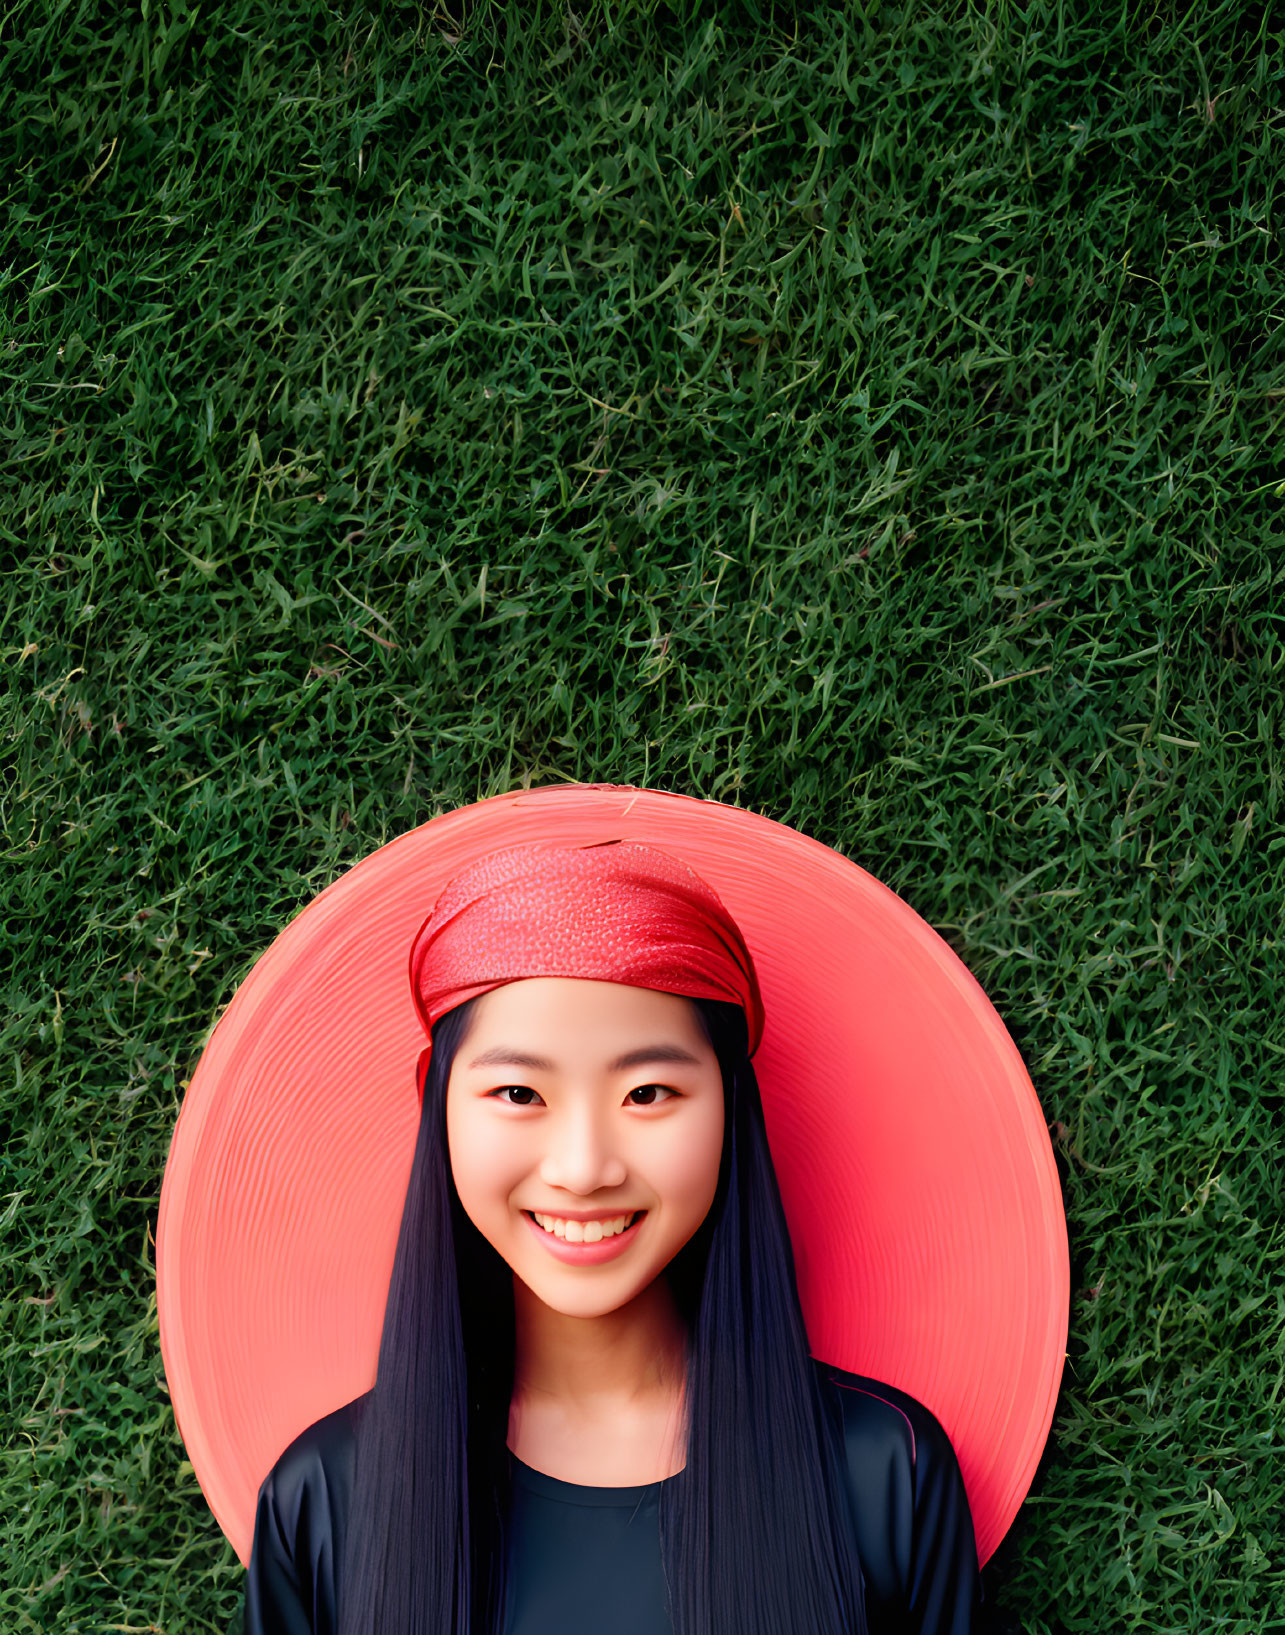 Young Woman with Black Hair and Red Hat Smiling on Green Grass